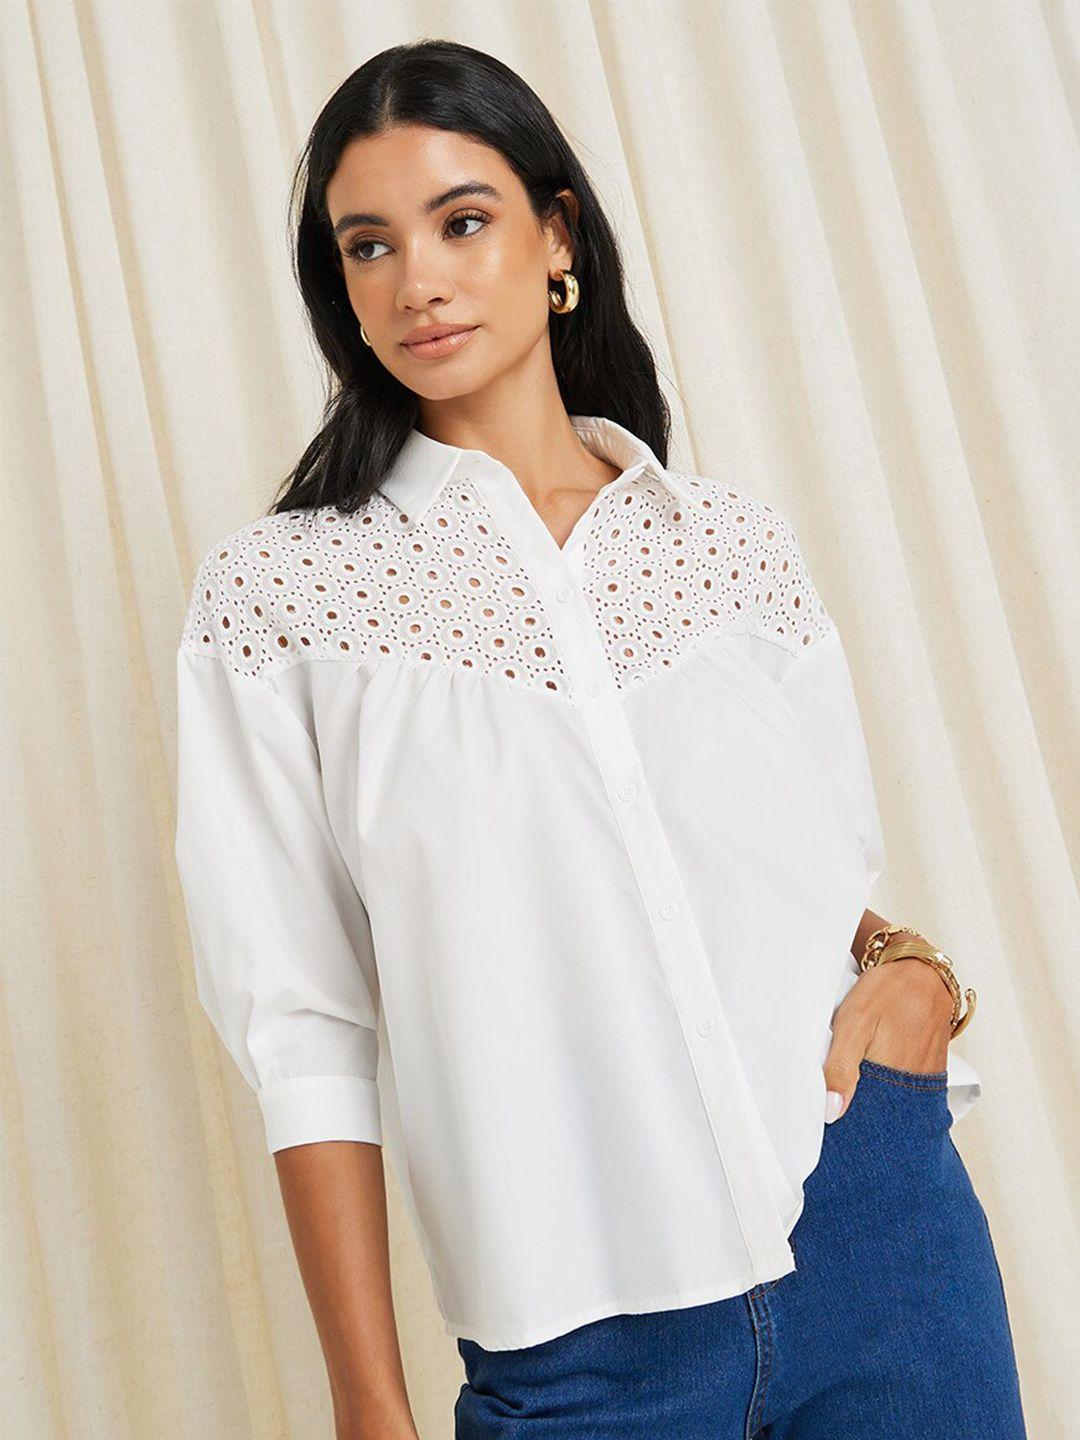 Styli Extended Sleeves Spread Collar Casual Shirt